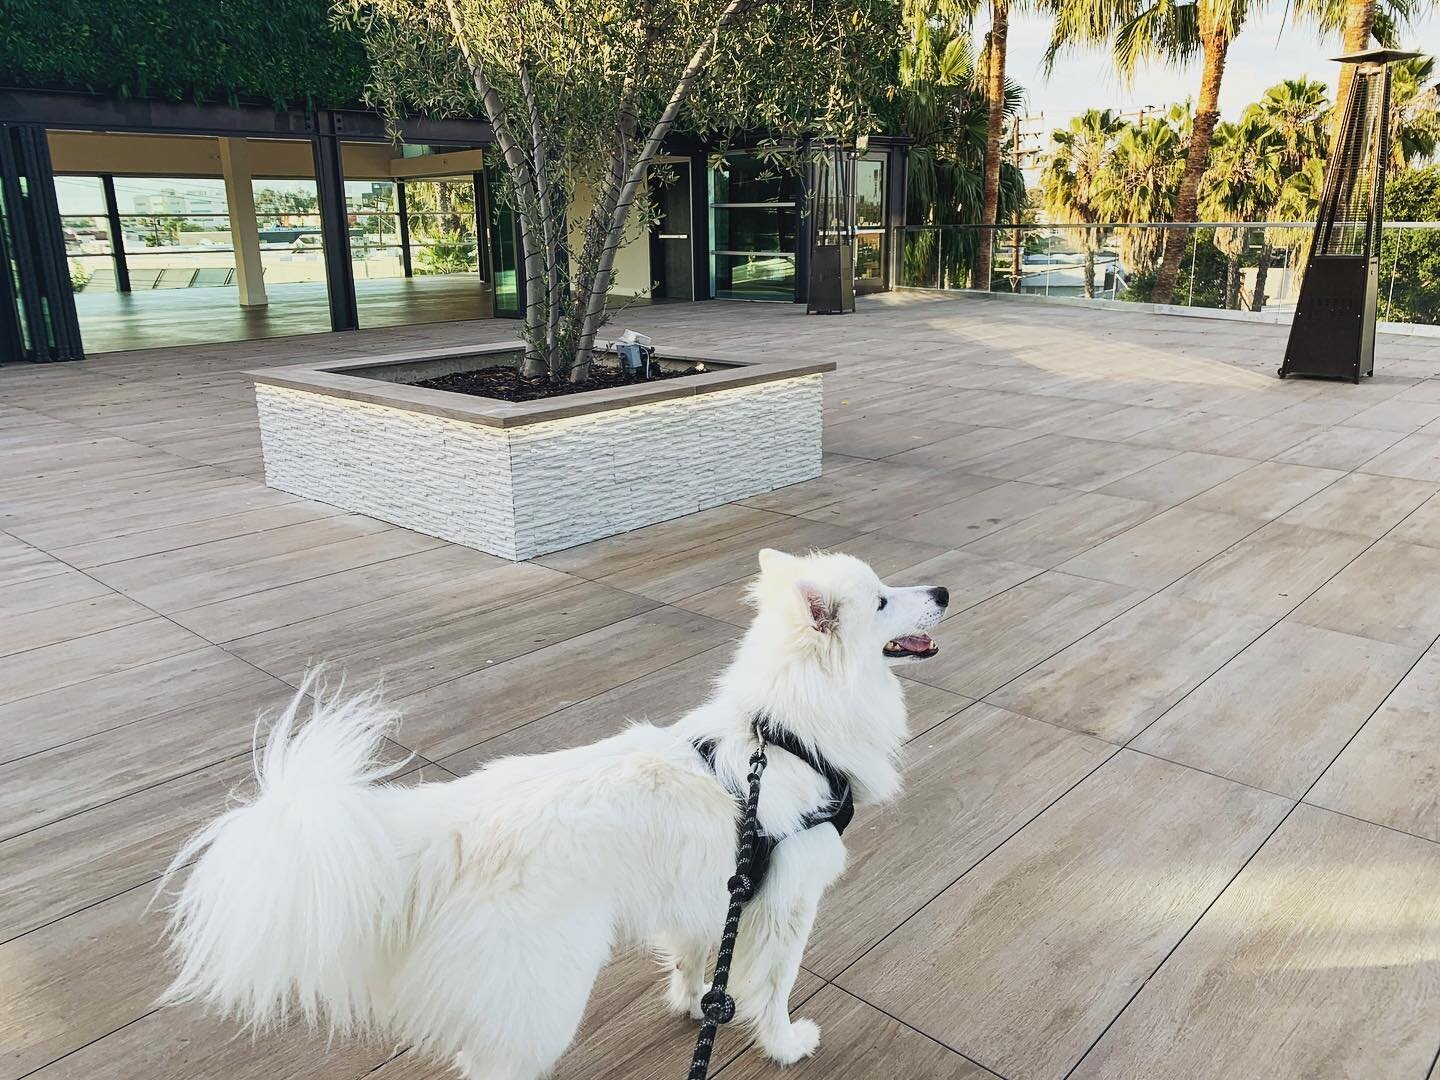 Ploof approved patio space.... ya we are blessed to have one of the best rooftops in all of LA, here at @palmsophiarooftop .... @kingsleythepuppyman gives it the seal of approval ;) #laeventspace #larooftop #lafilmlocations